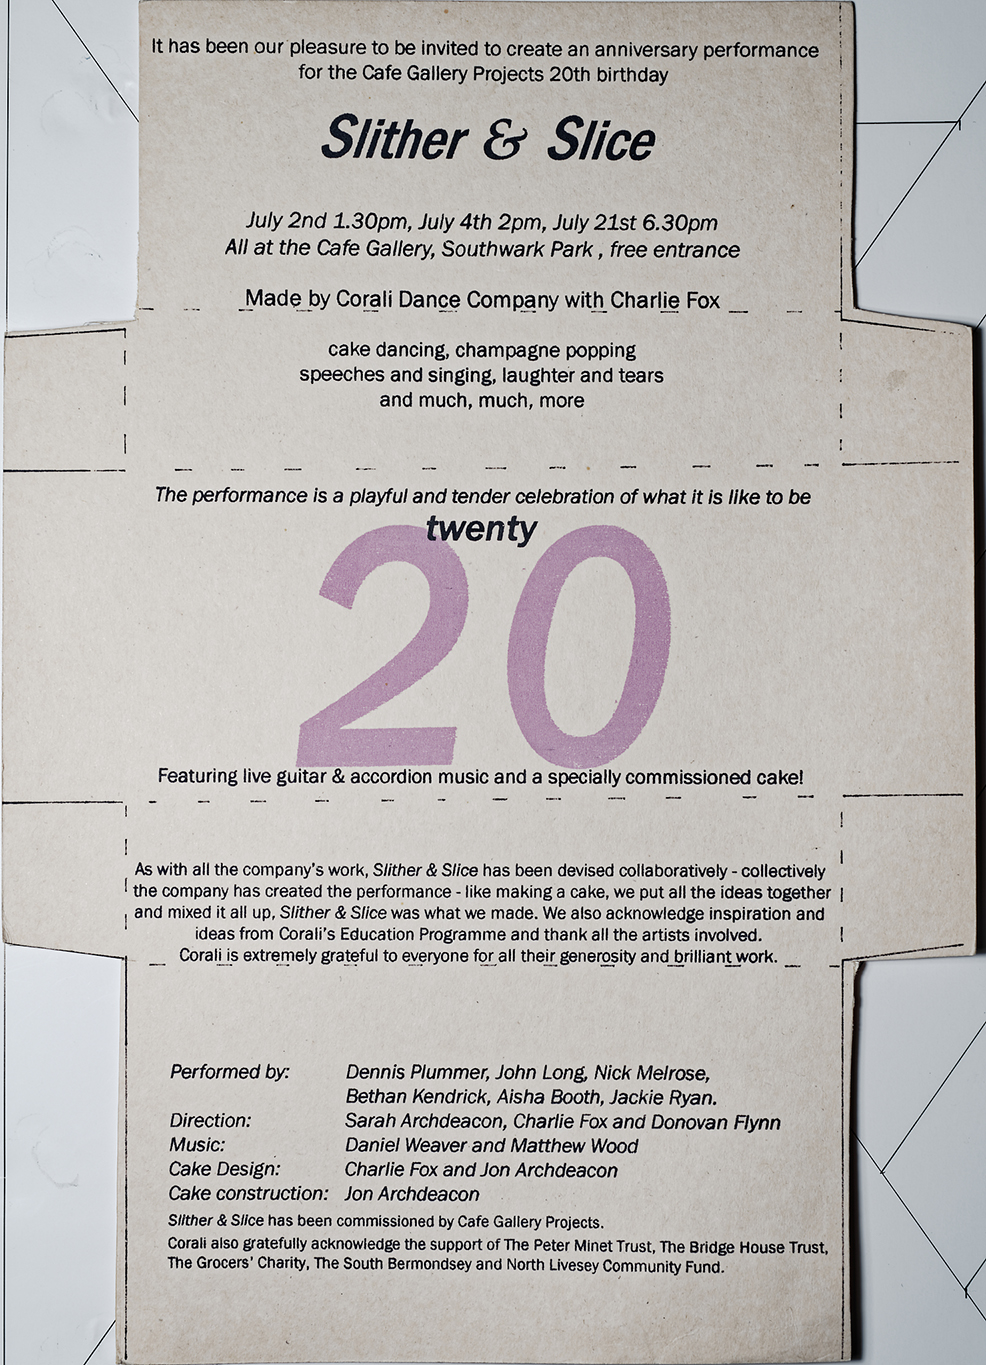 A programme of Slither & Slice performance by Corali Dance Company. The programme has been made on cardboard cut to the shape of a cake box and clearly shows it has been commissioned for Café Gallery Projects 20th Anniversary